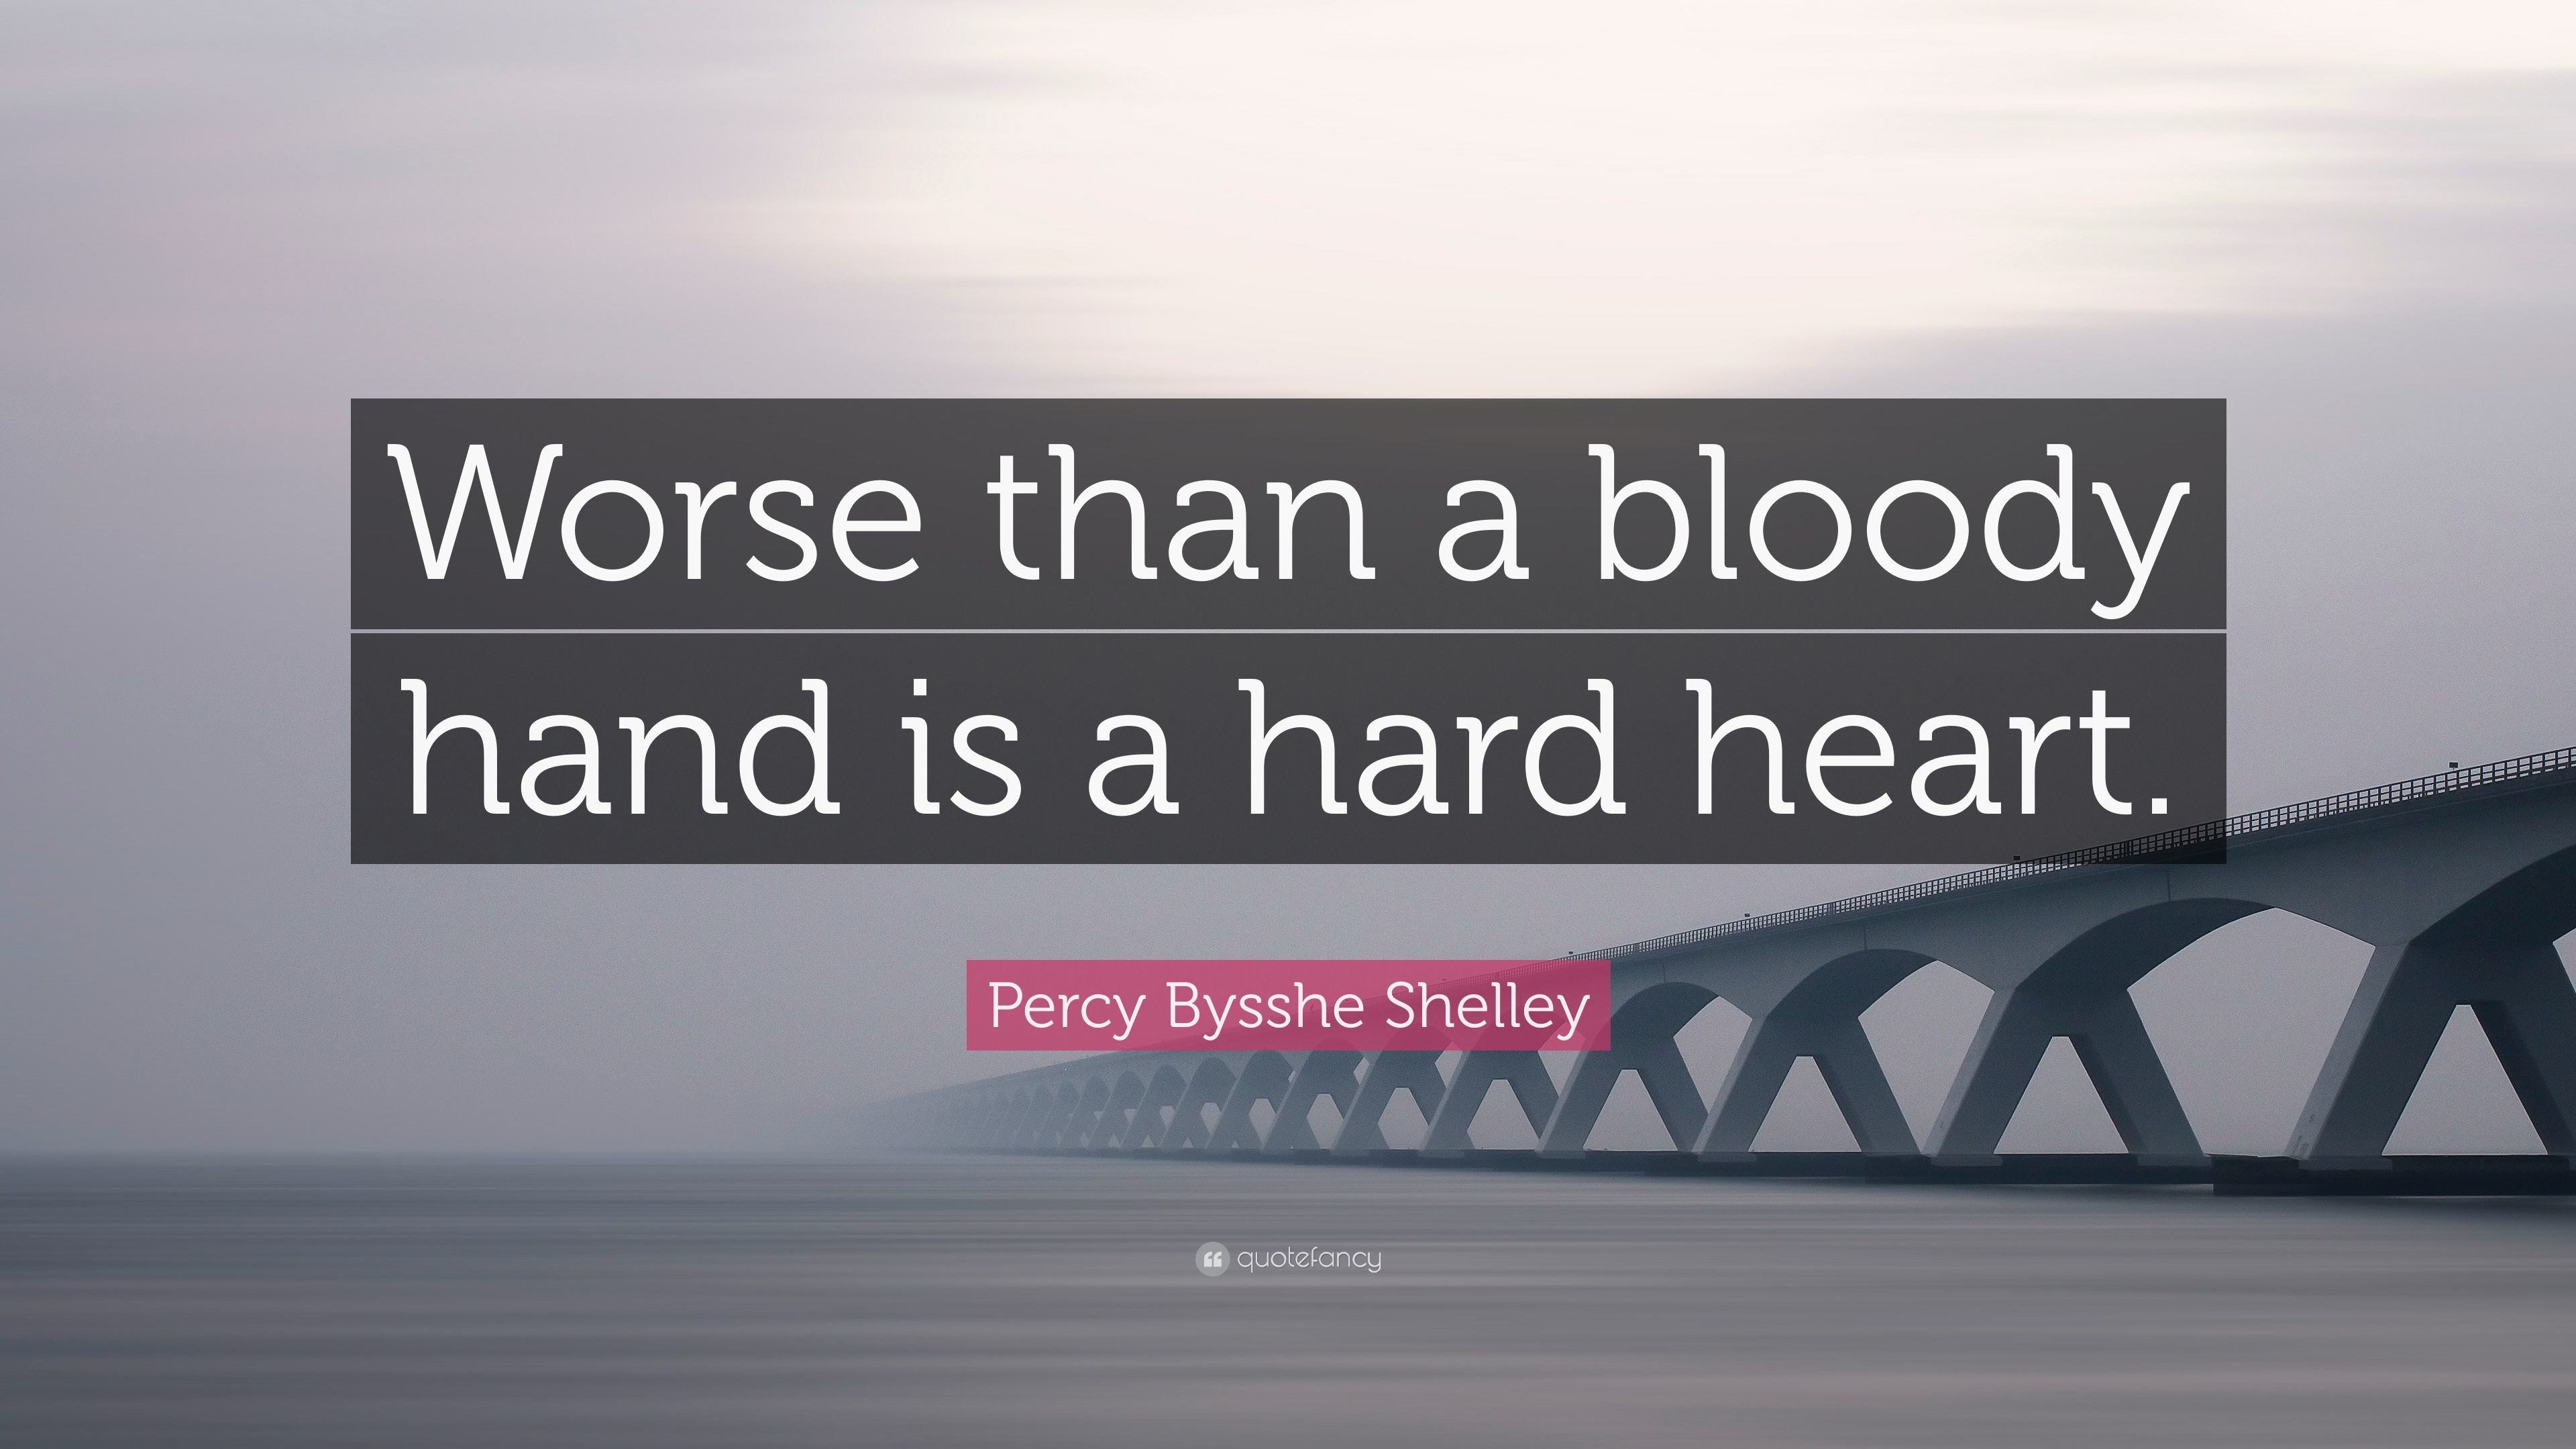 3840x2160 Percy Bysshe Shelley Quote: “Worse than a bloody hand is a hard heart.